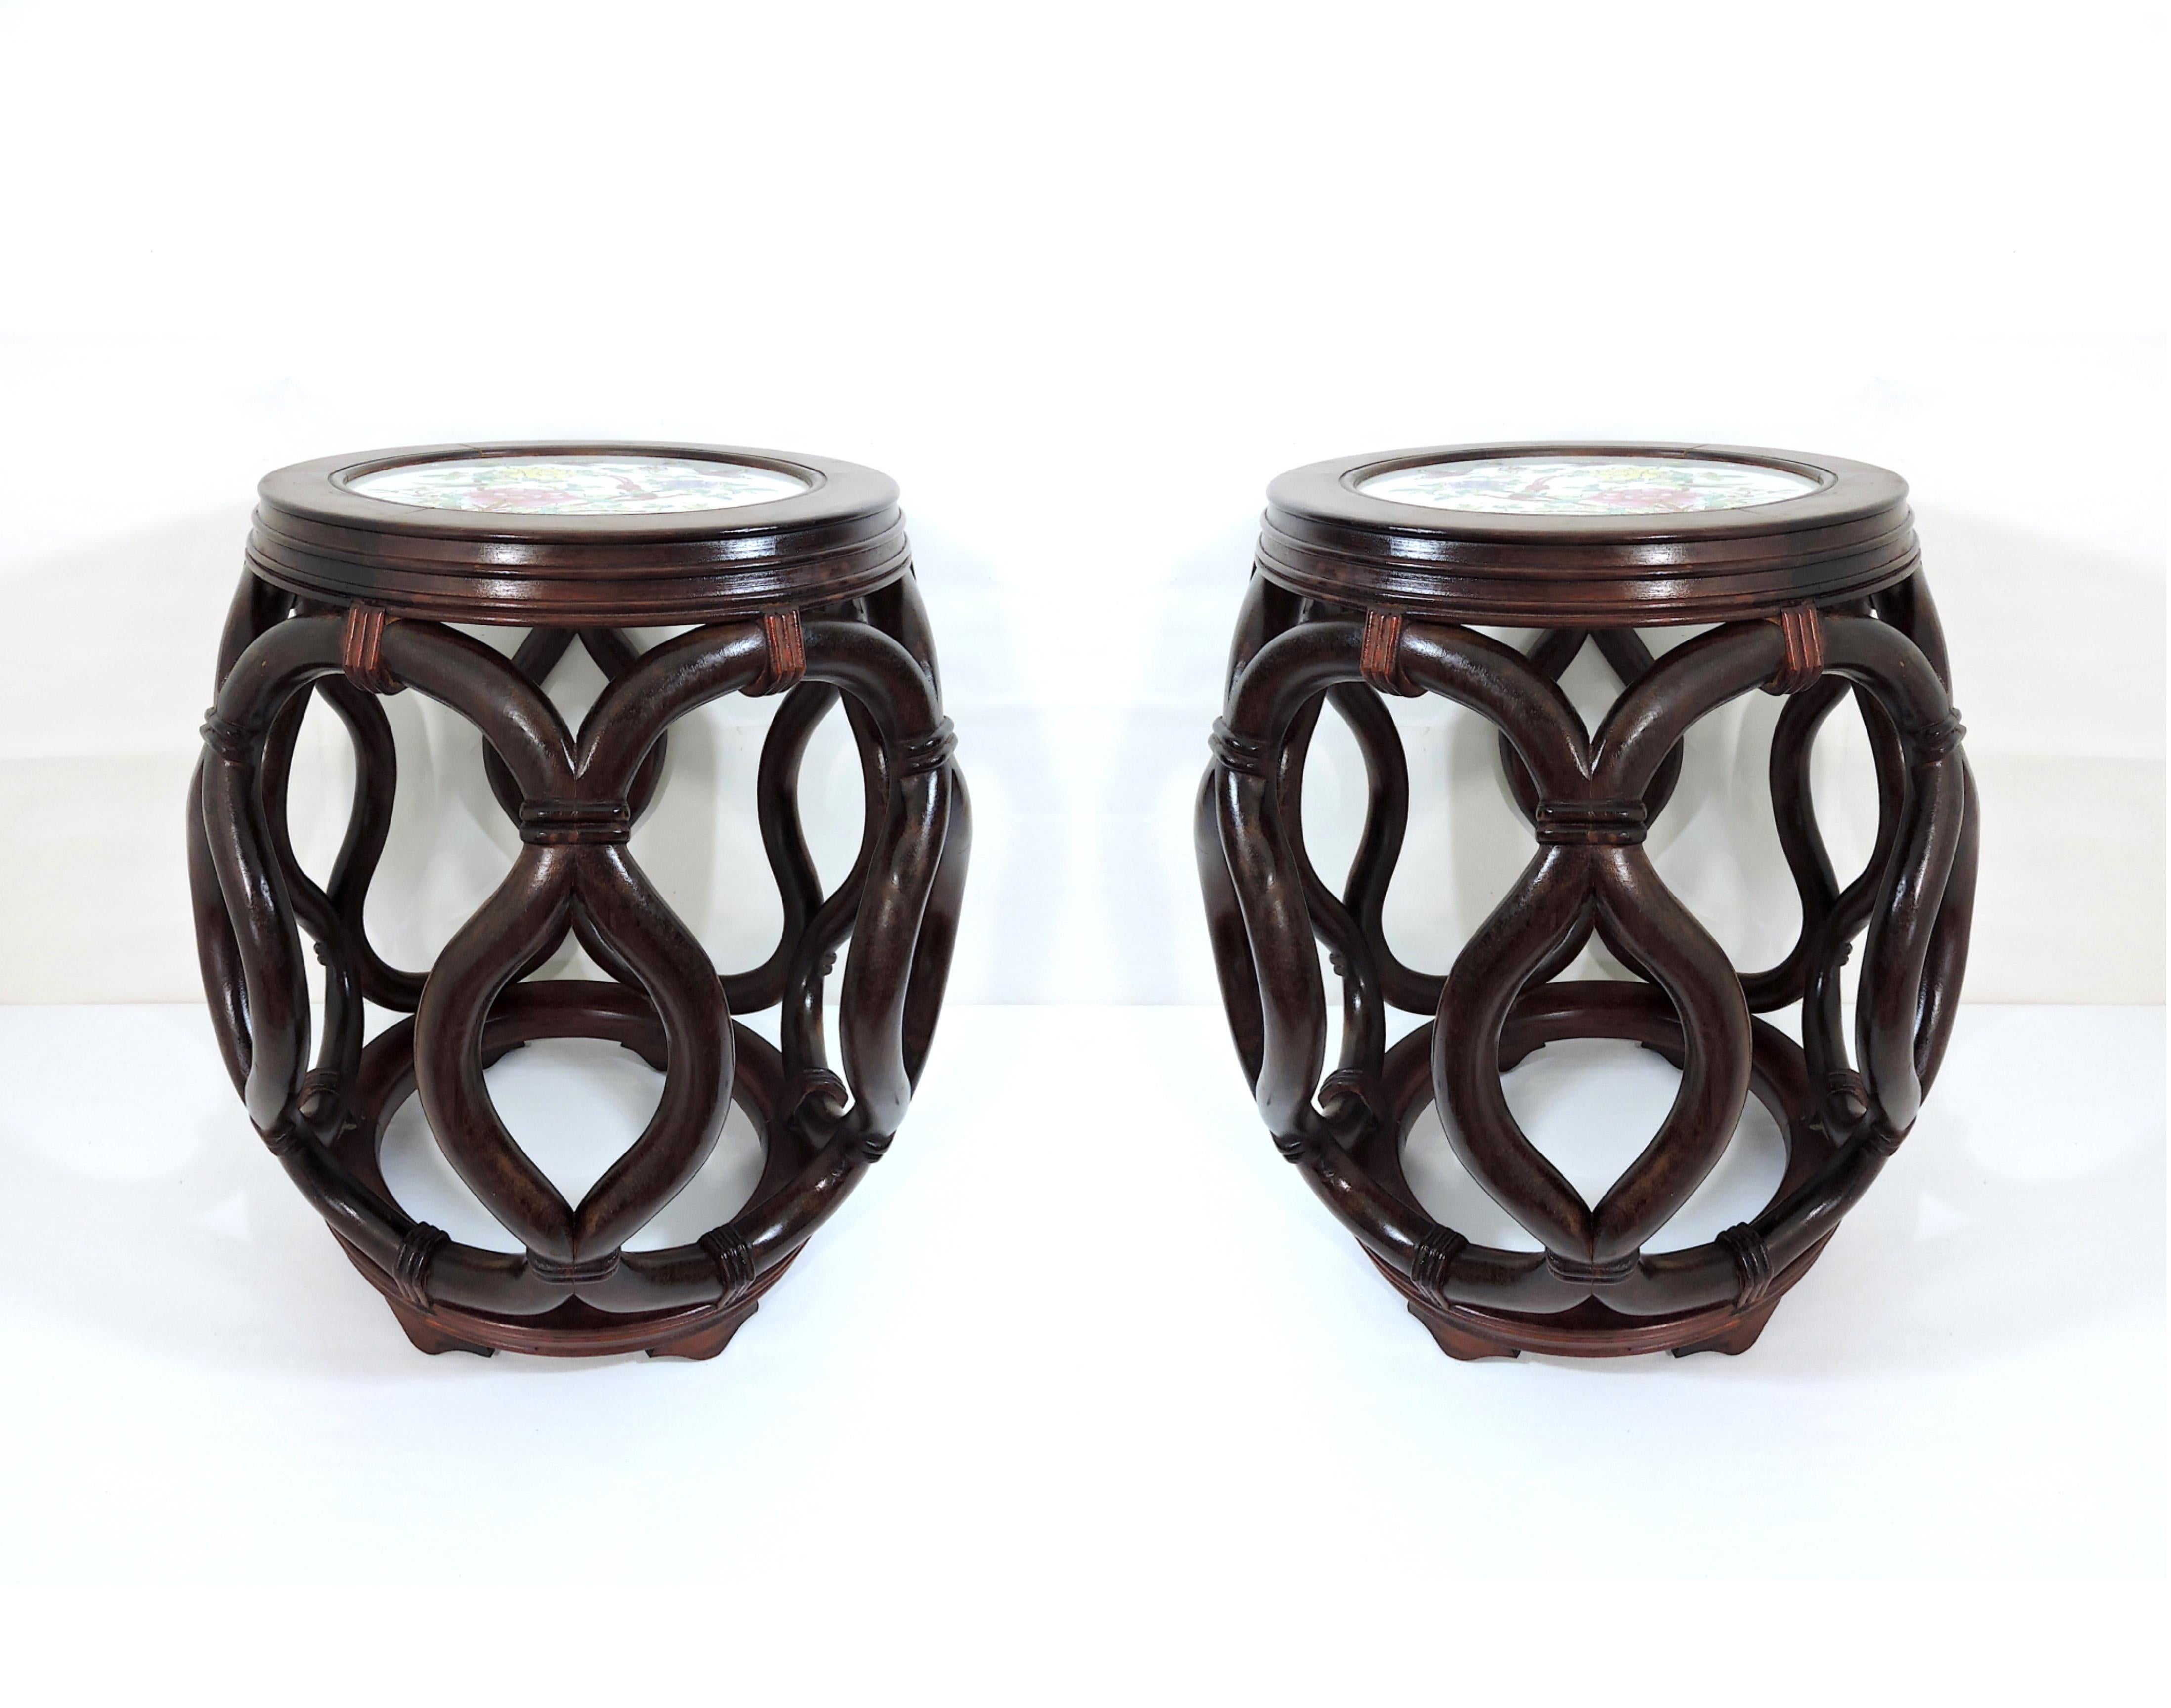 A matched pair of antique Asian carved perfectly symmetrical rosewood barrel stools, late 19th-early 20th century. Each handmade stool features a circular form with carved open-work rope simulated frame ties on a circular base raised on four short